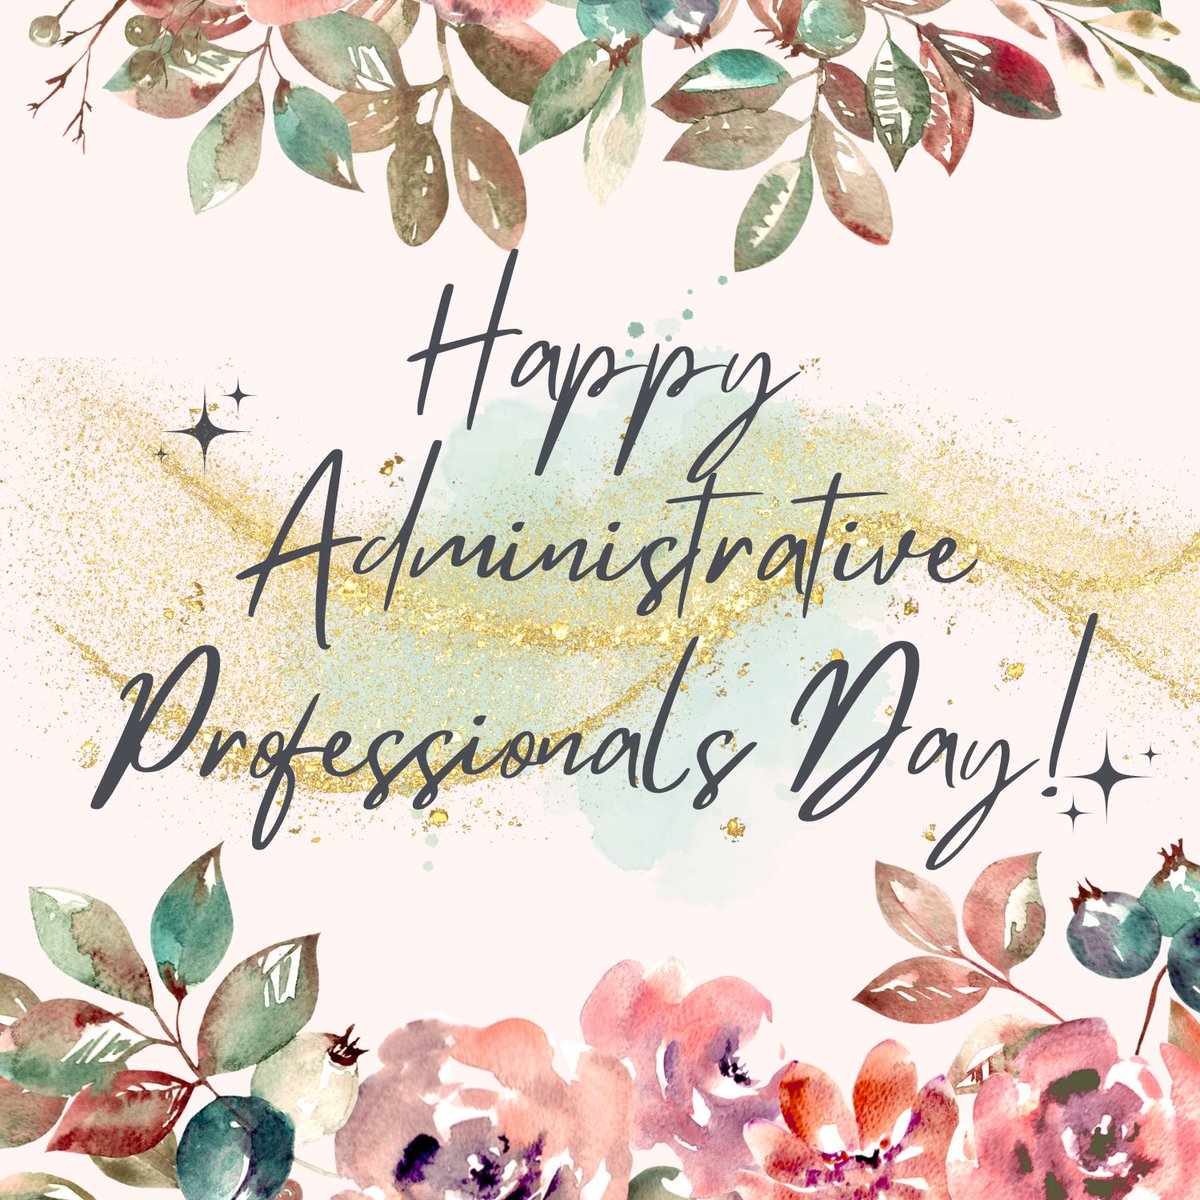 Happy Administrative Professionals Day to our outstanding 'Glitter Committee!' Thank you, Ginny, Olga, Katrina, @APSCCMartinez , Alexis, and Ada for your wonderful support of our students, staff and community and for making every day brighter. @Margaretchungcc @APSVirginia